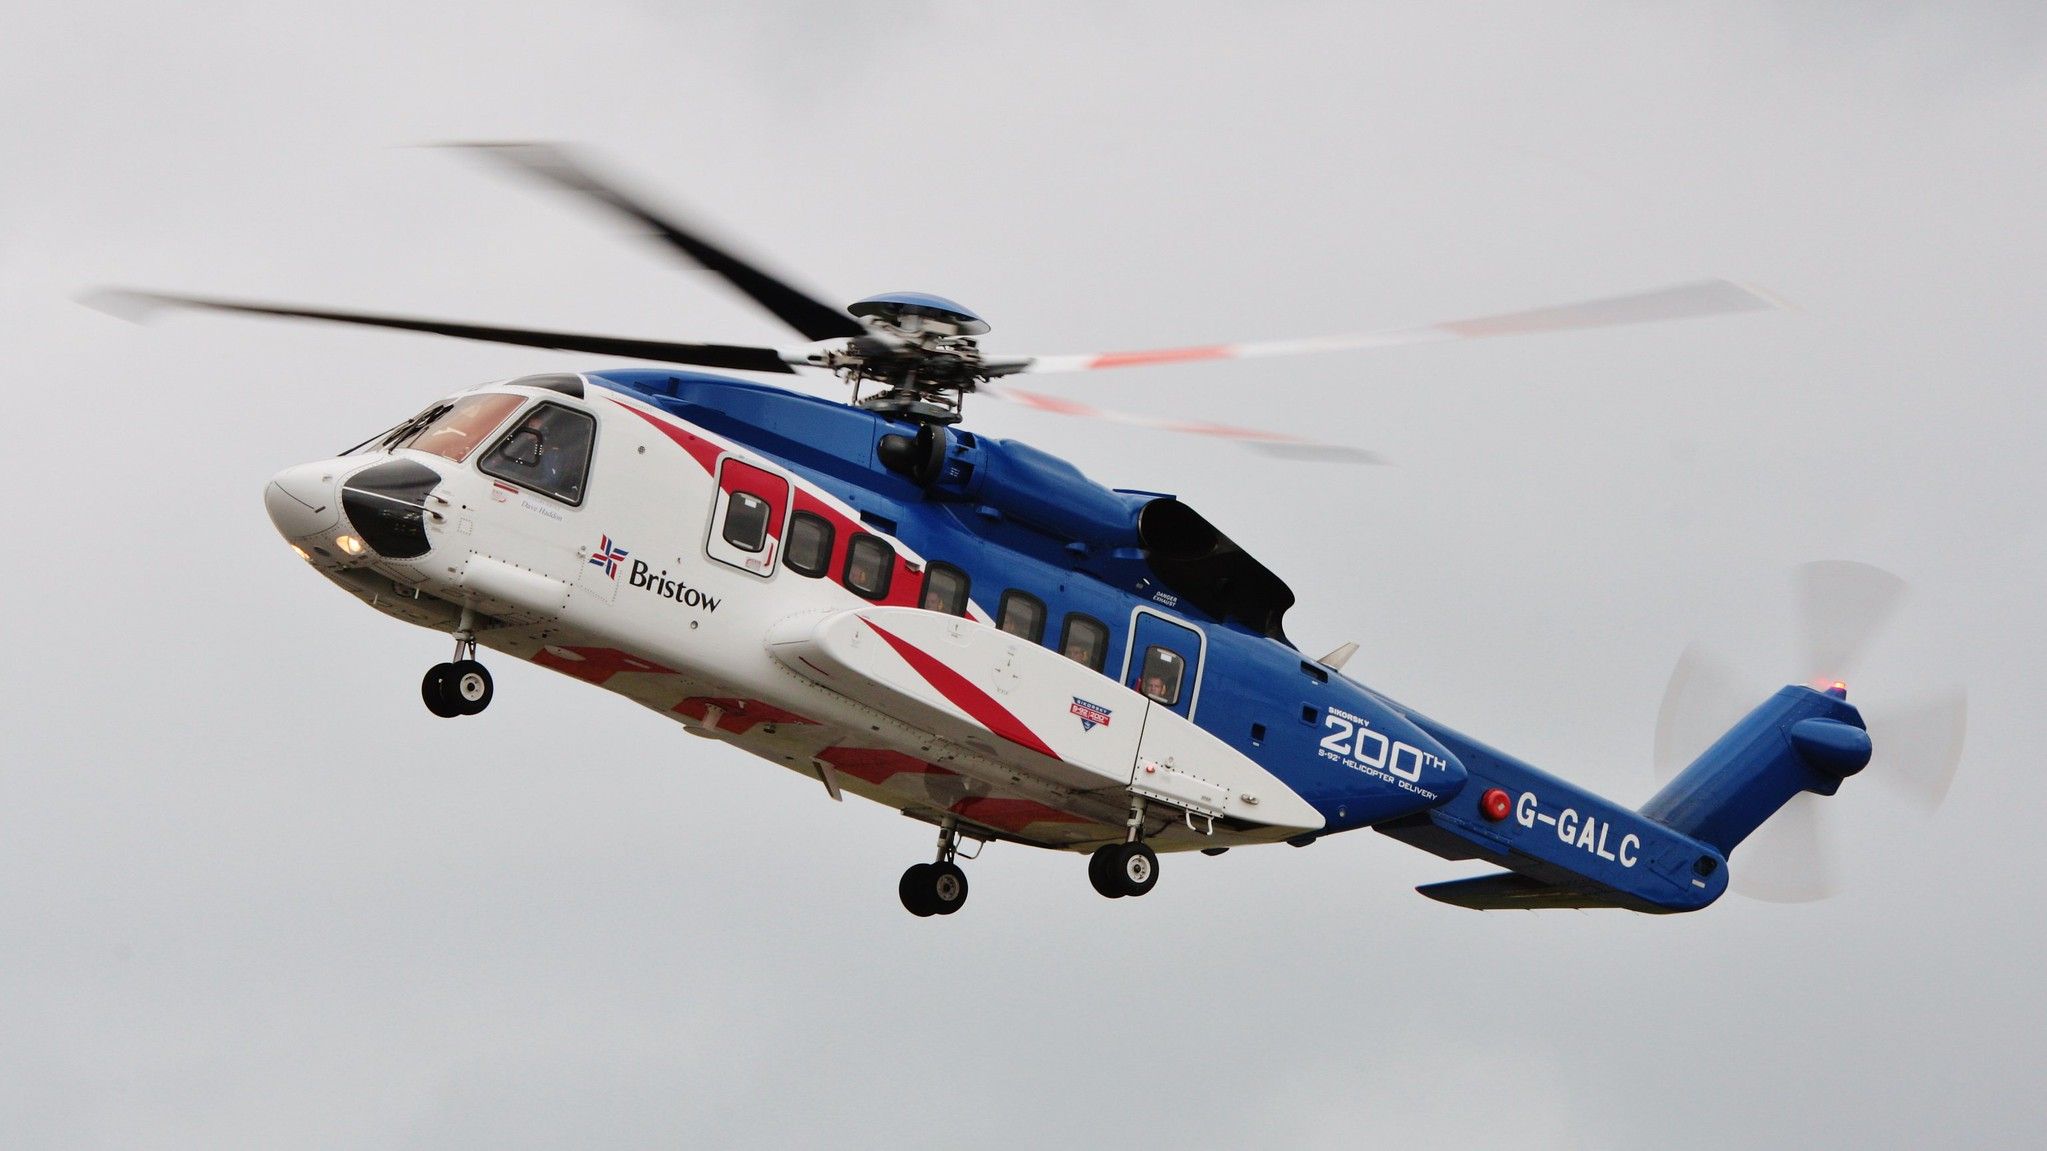 A Bristow helicopter